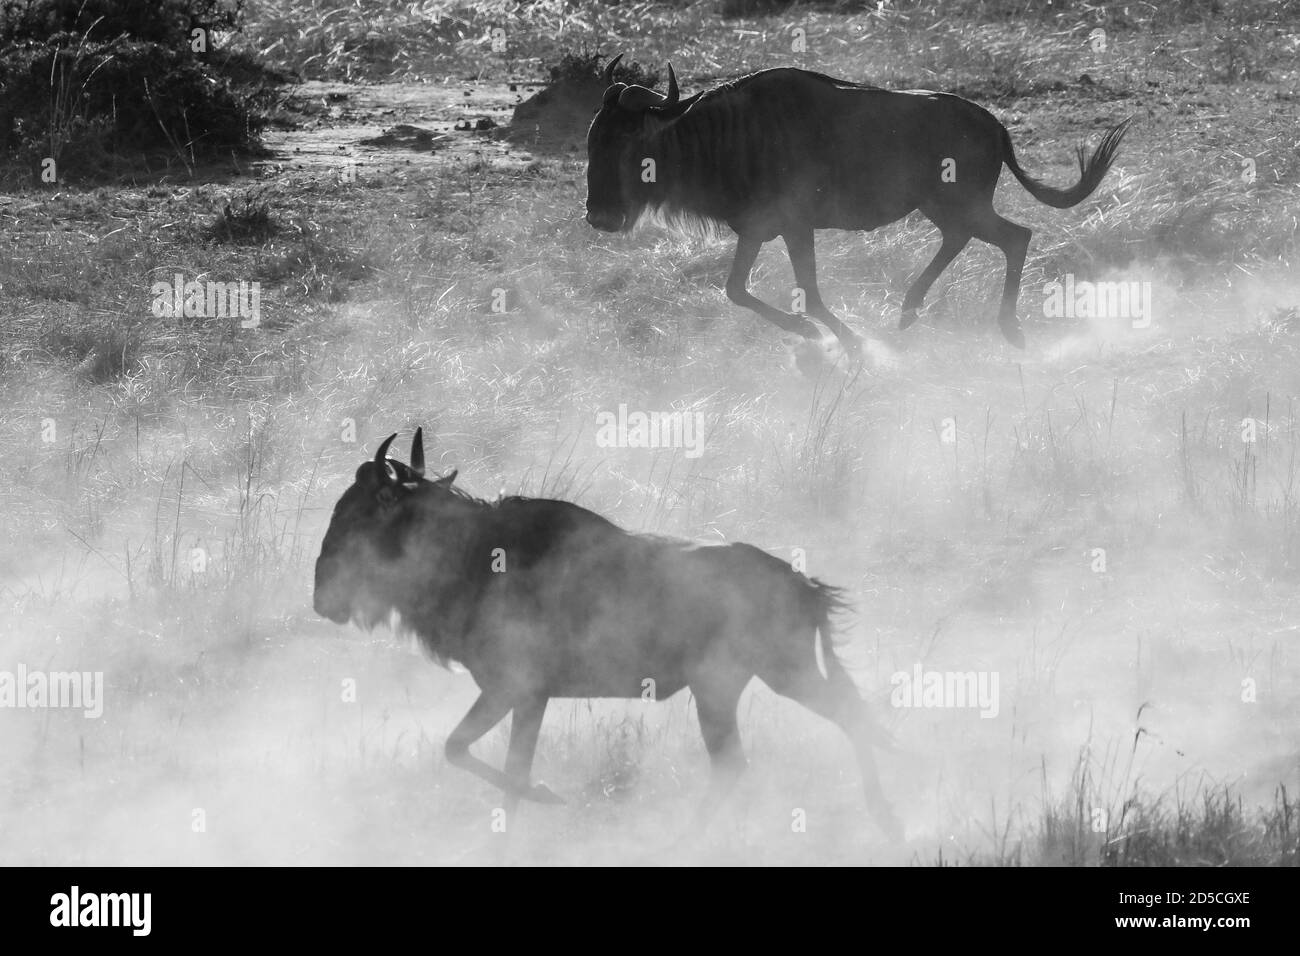 A blue wildebeest herd (Connochaetes taurinus) is targeted by several cheetahs in the Masai Mara of Kenya Stock Photo